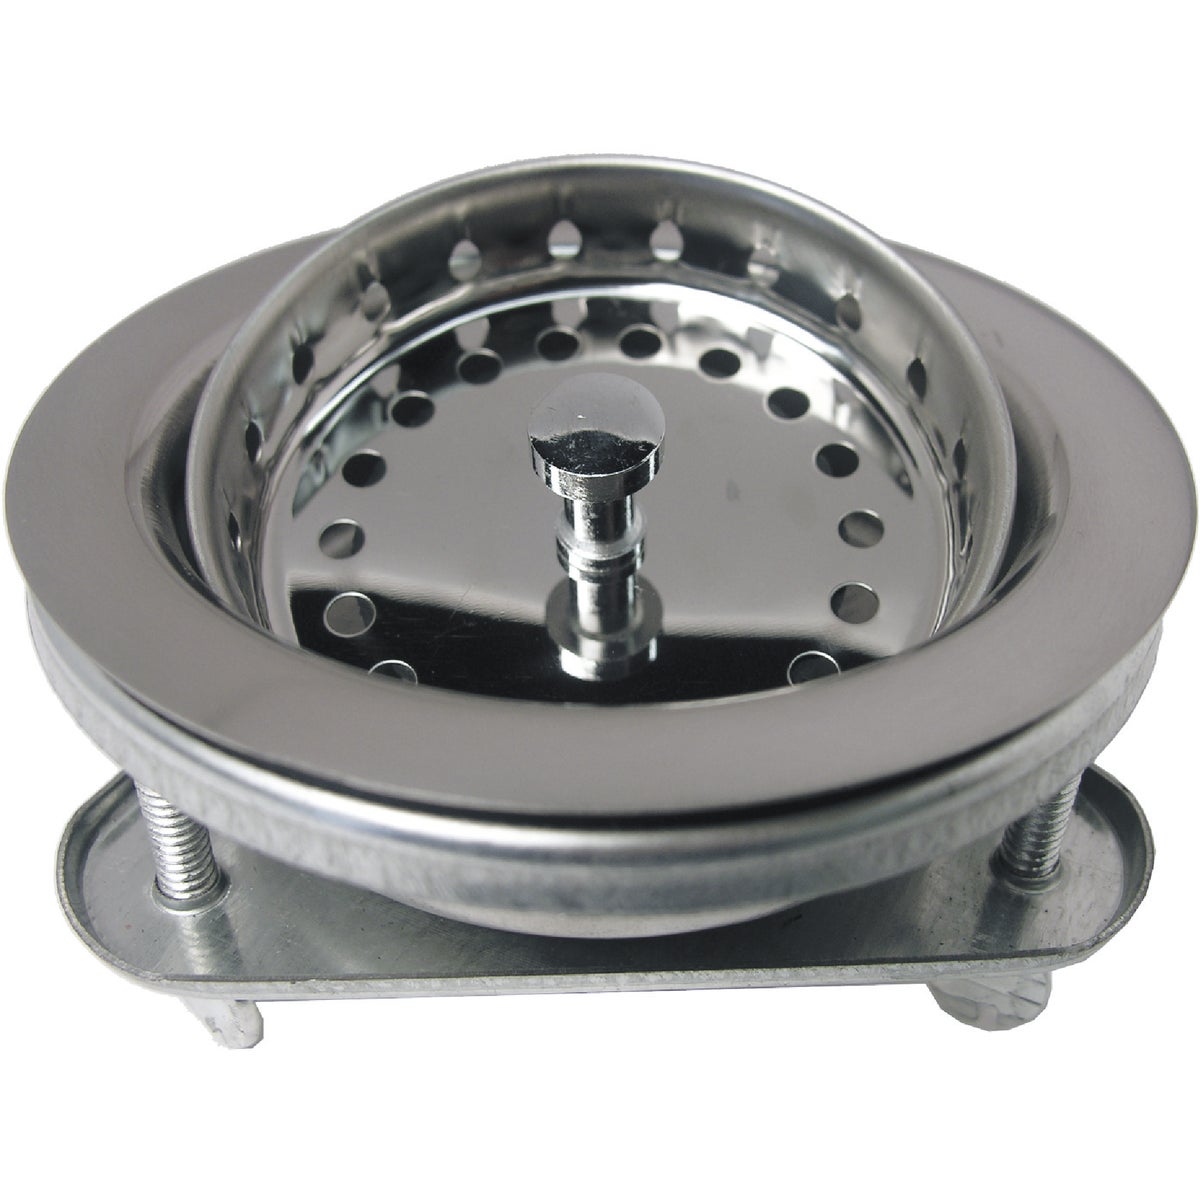 Lasco 3-1/2 In. Chrome EZ-On Duo Basket Strainer Assembly